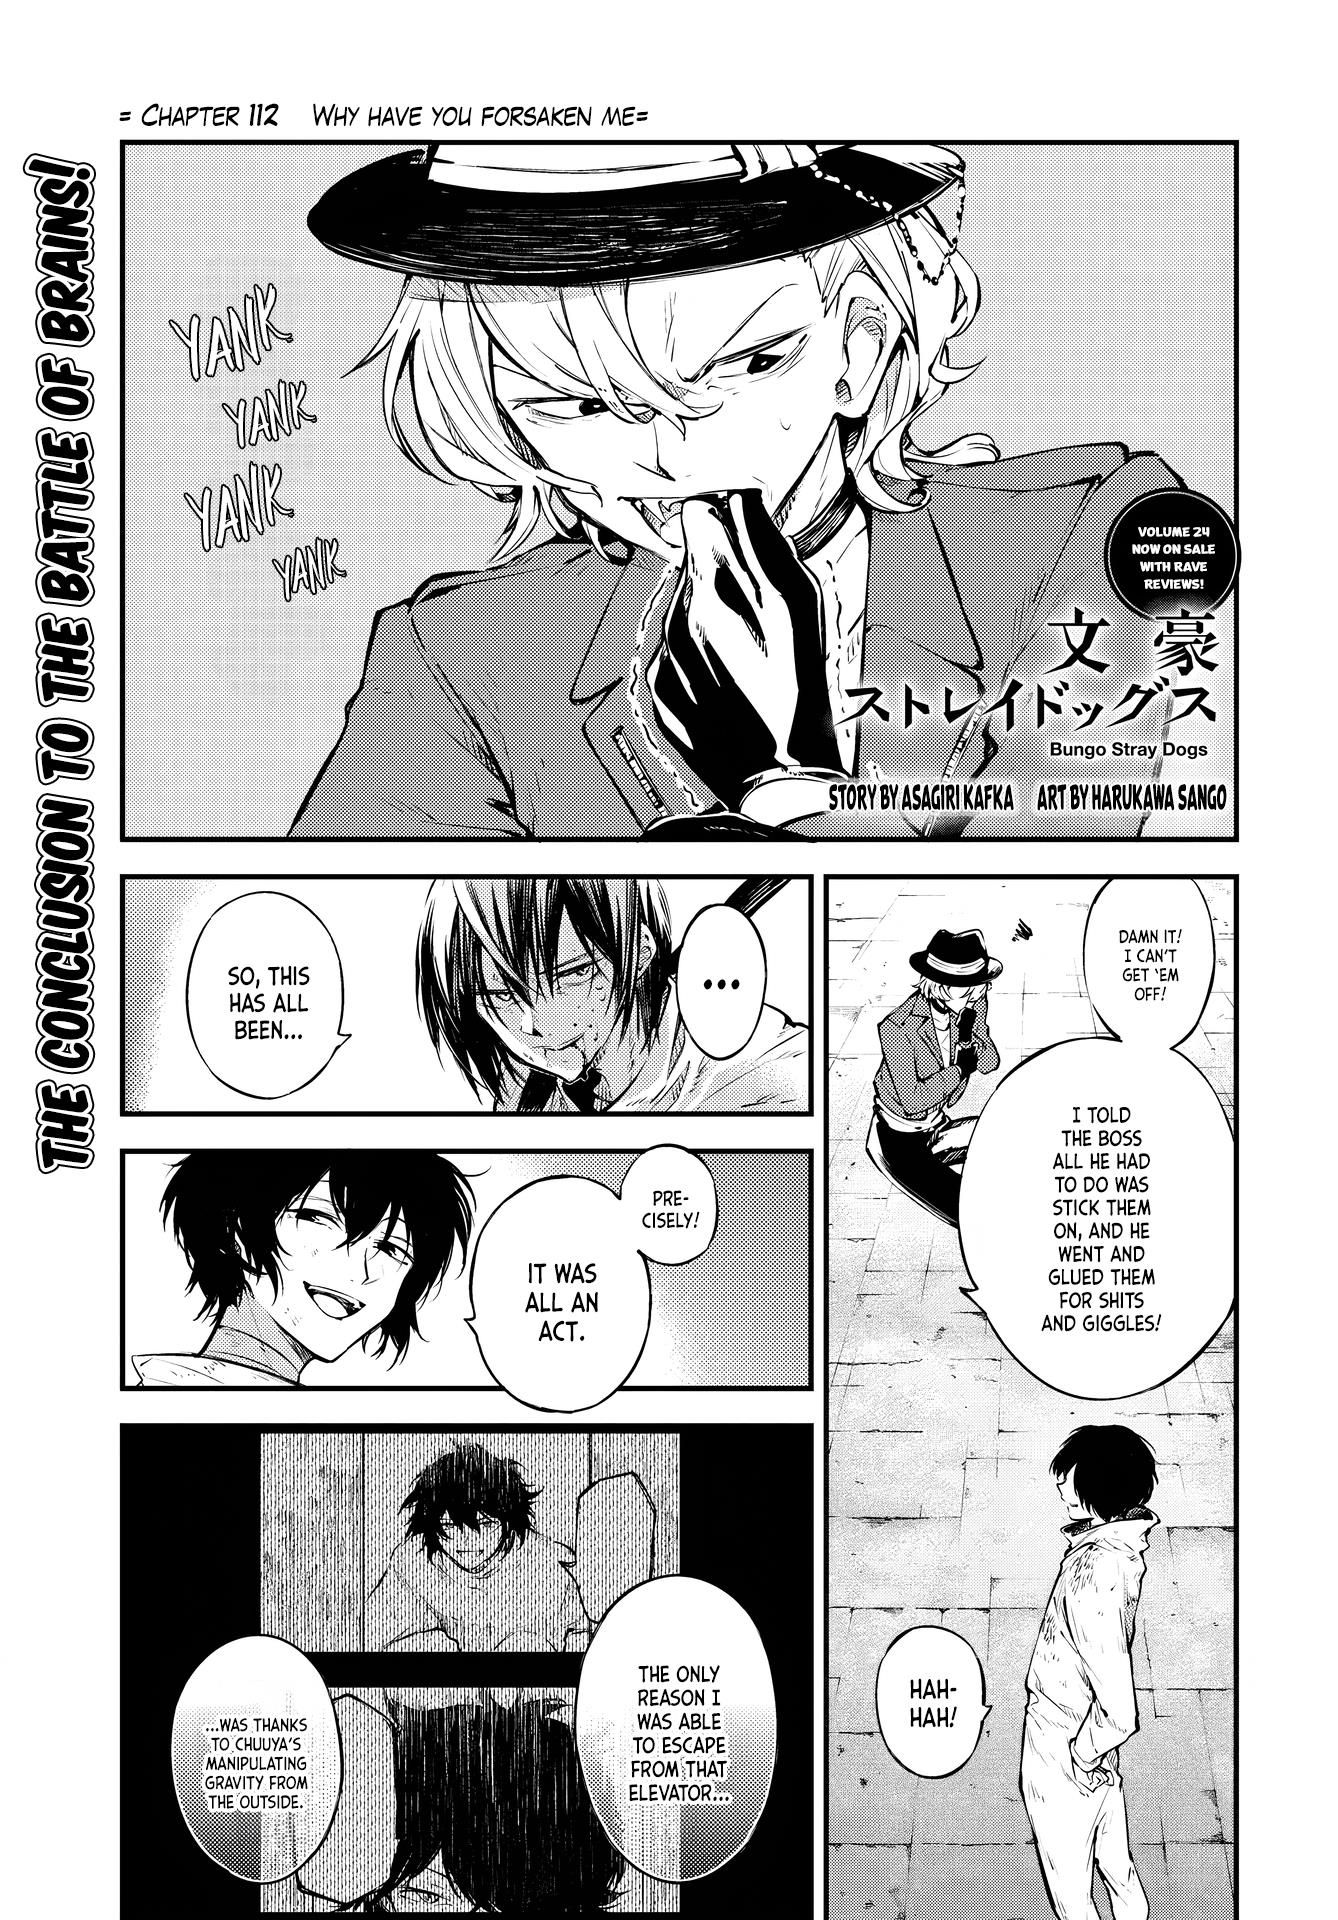 Bungo Stray Dogs chapter 112 page 1